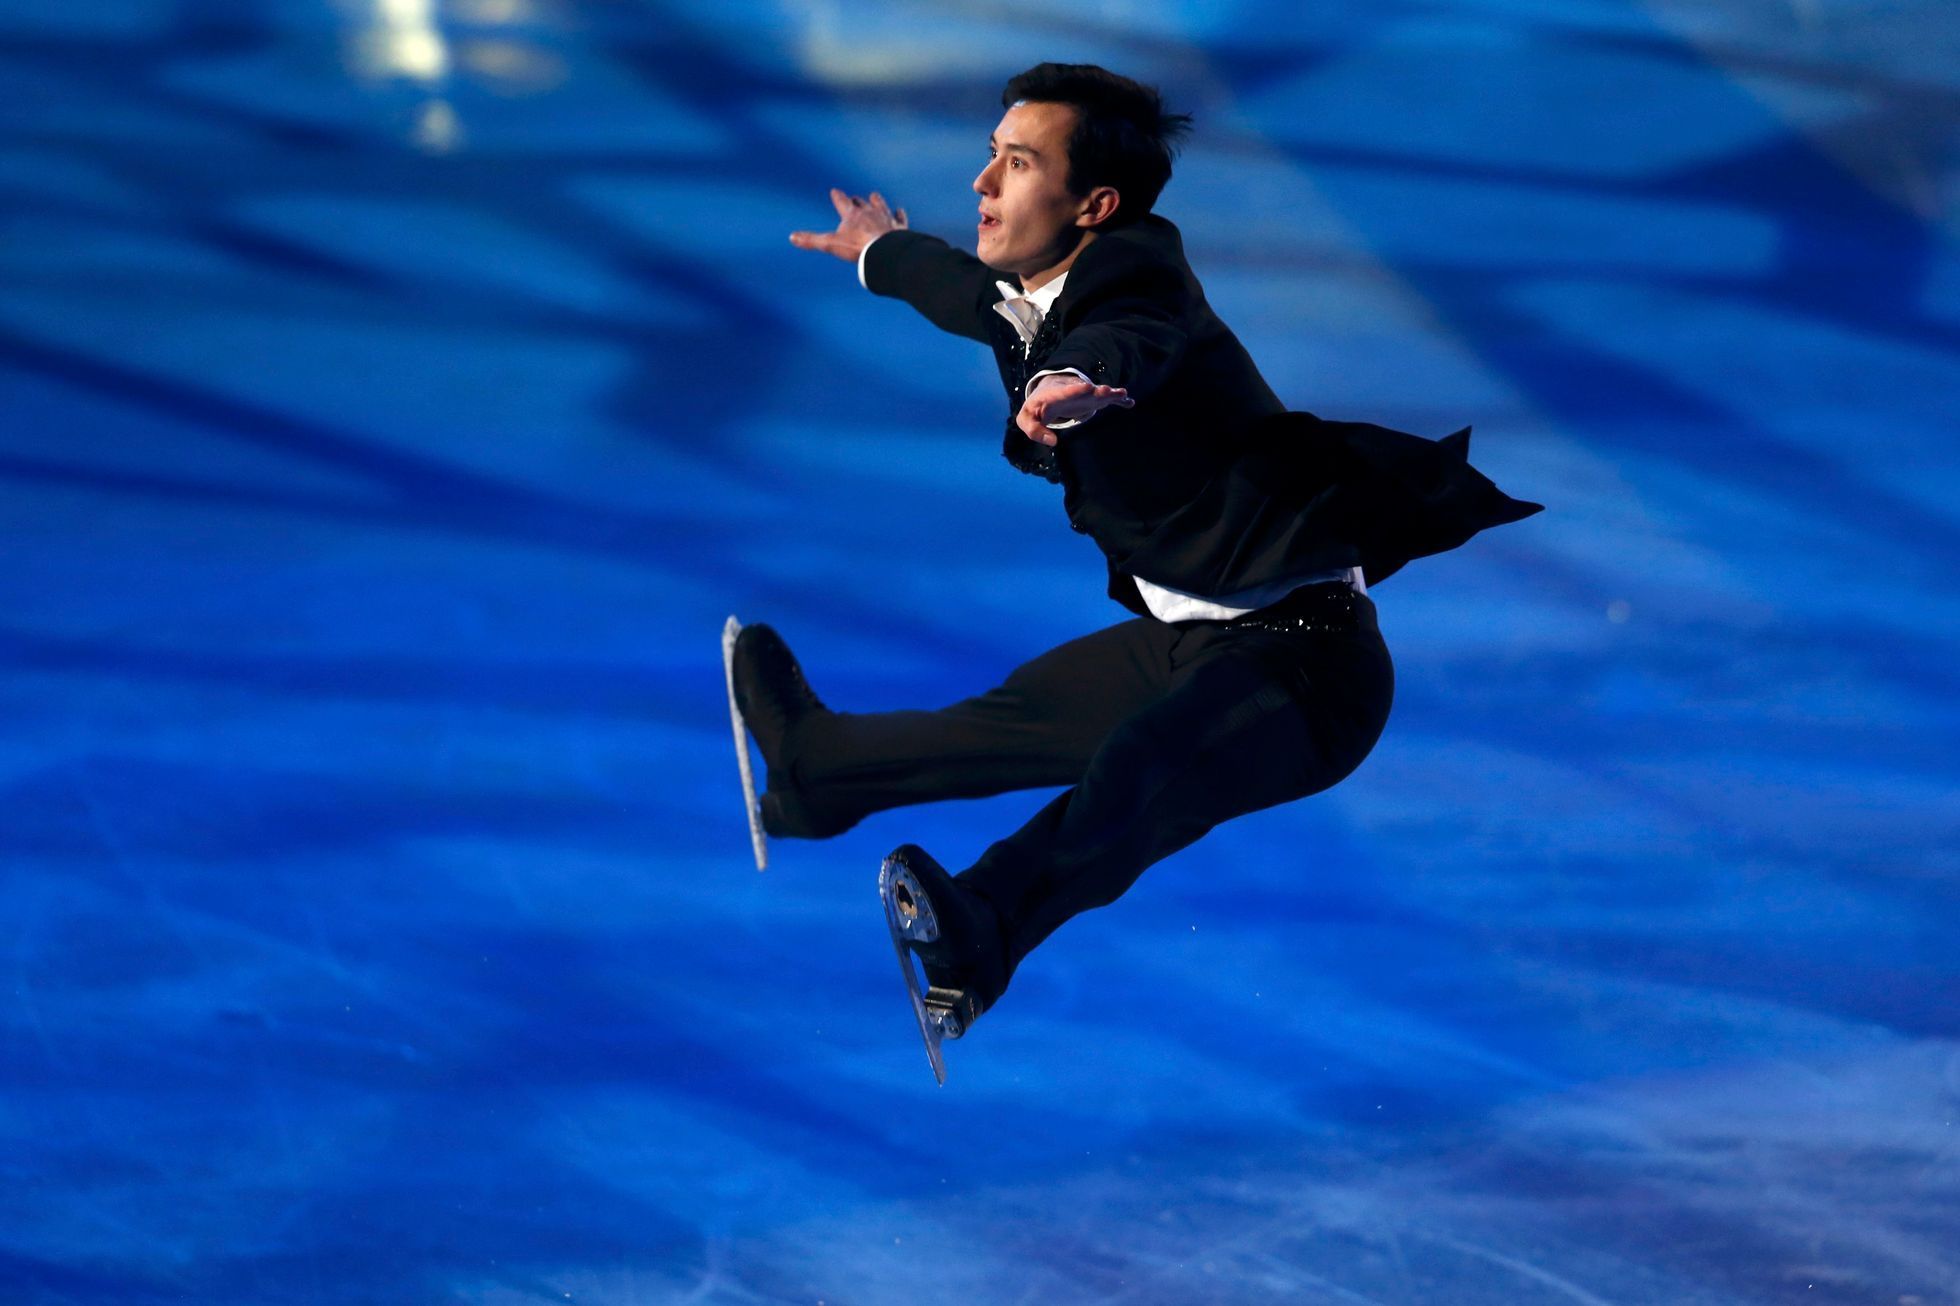 Patrick Chan of Canada performs at the gala exhibition during ISU Bompard Trophy event at Bercy in Paris